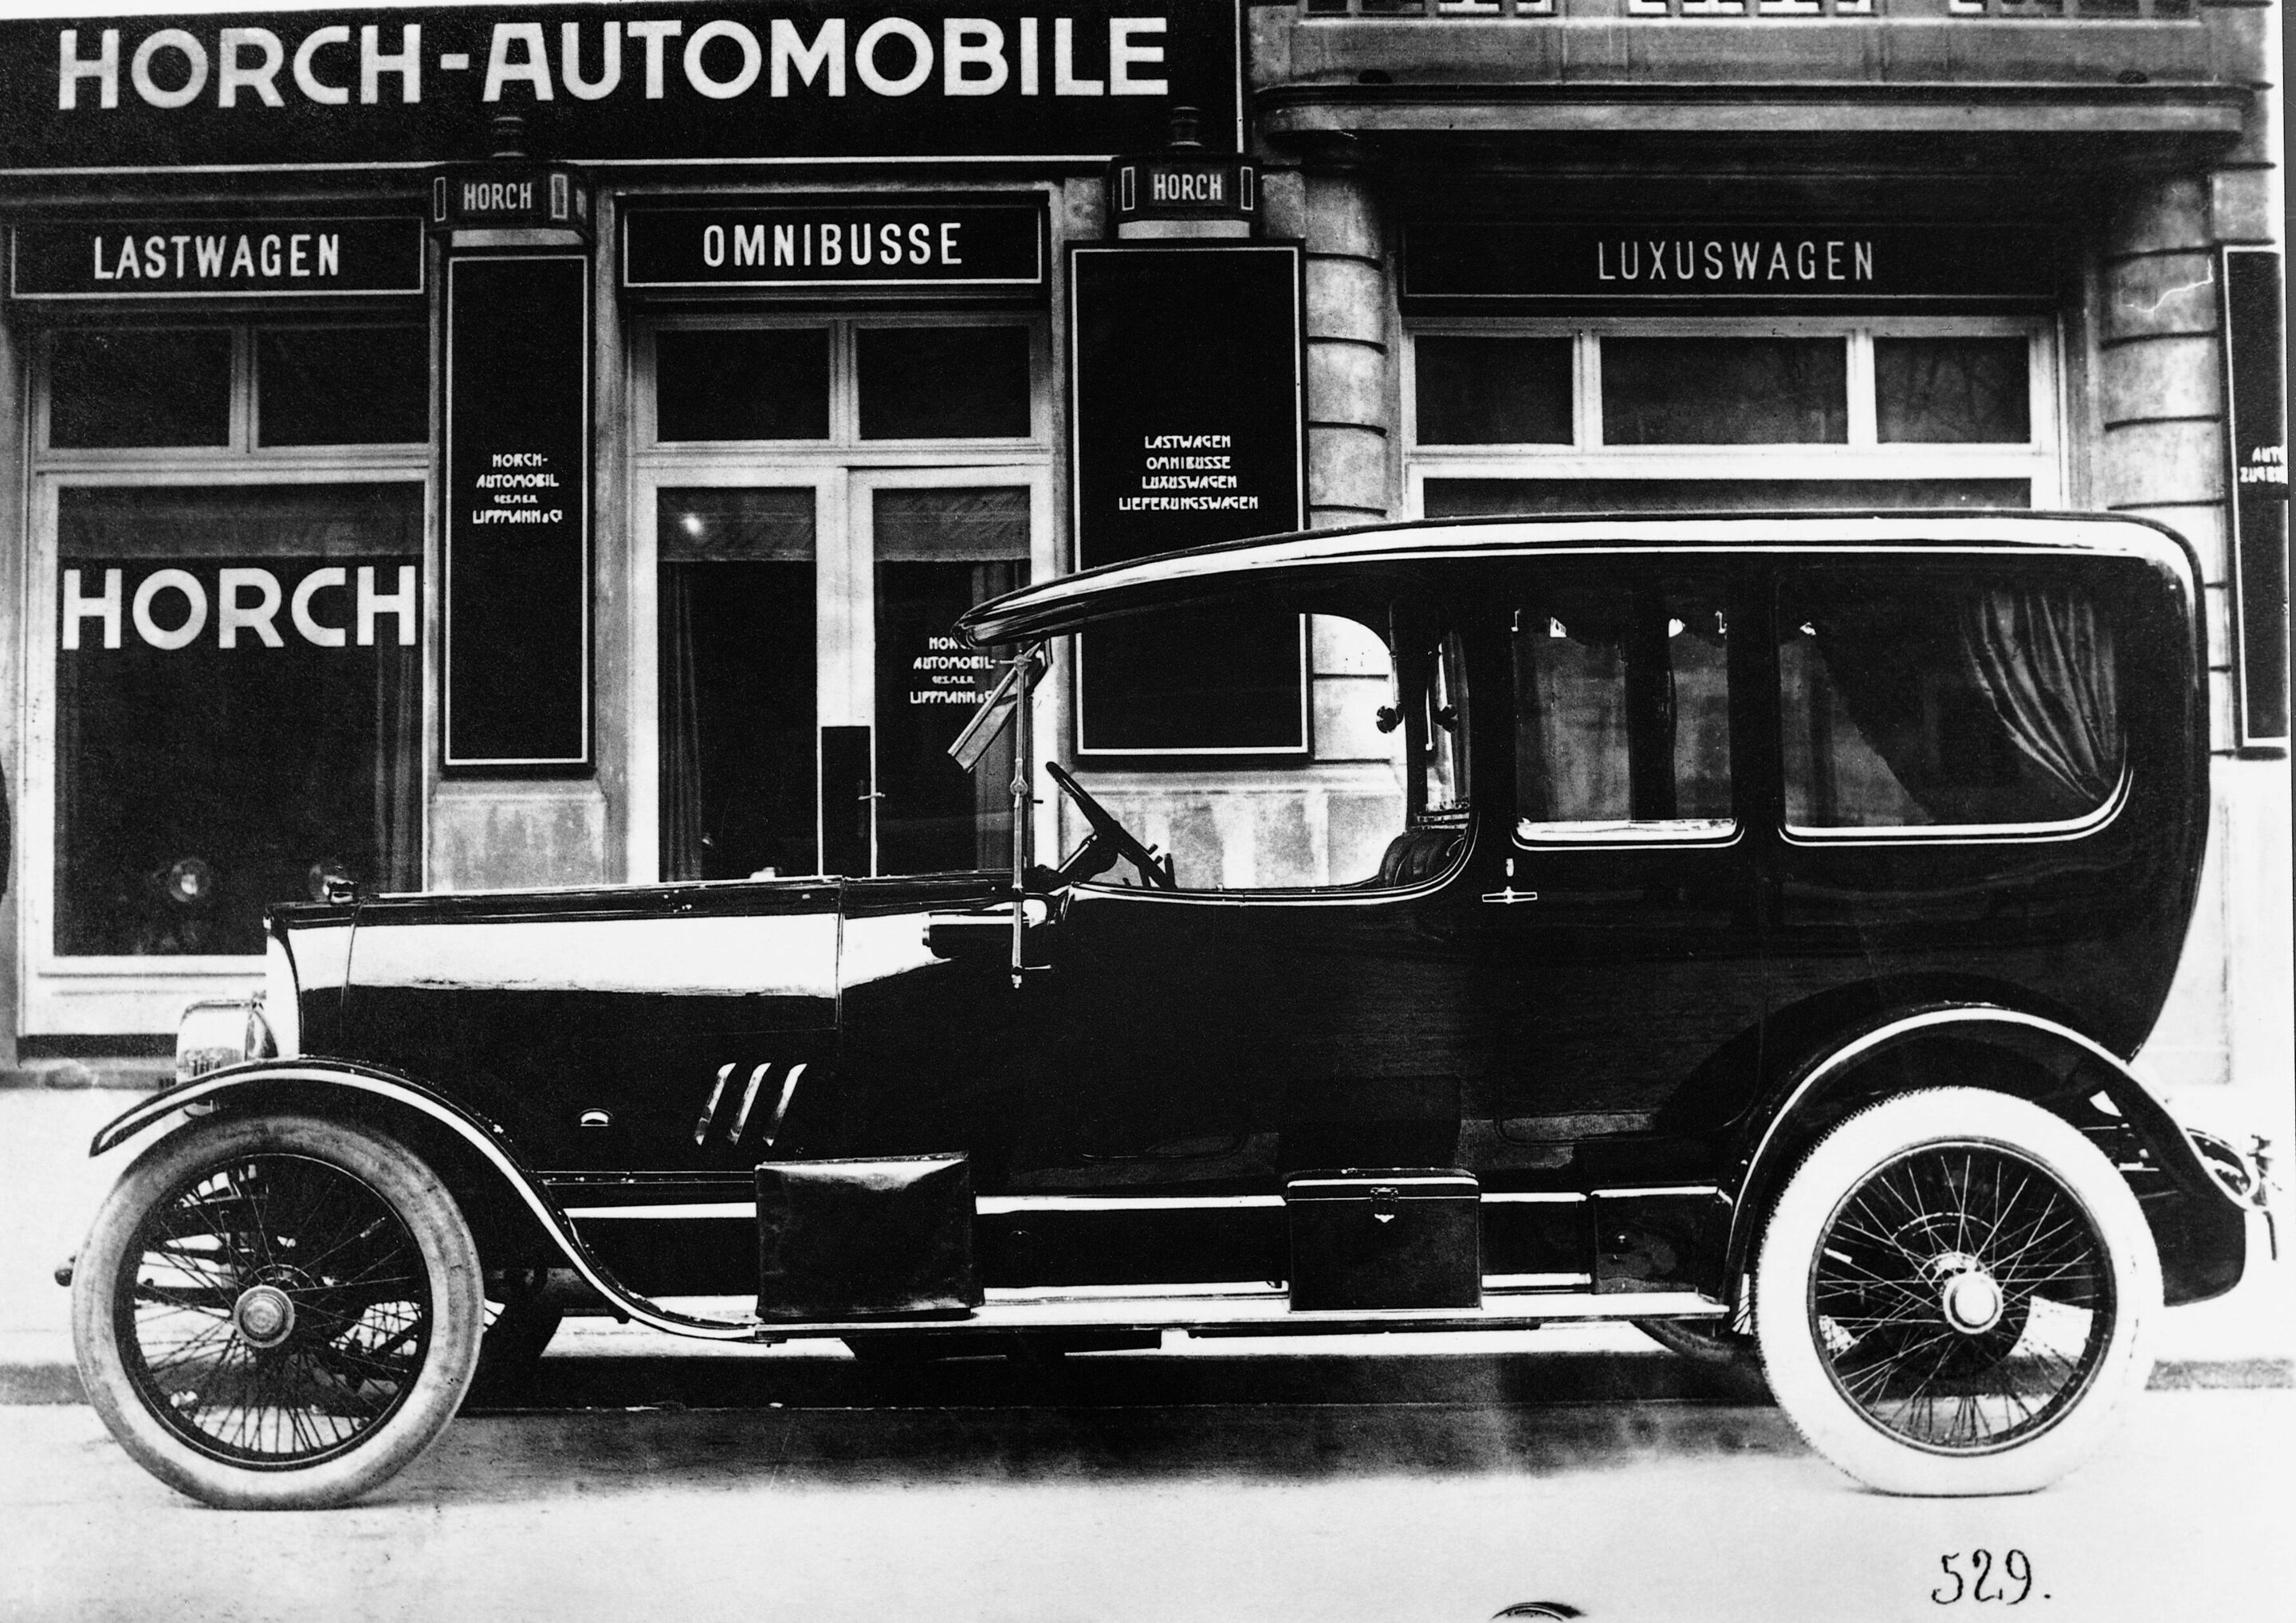 Horch 14/40 hp, saloon limousine, 4 cylinder 1913 model